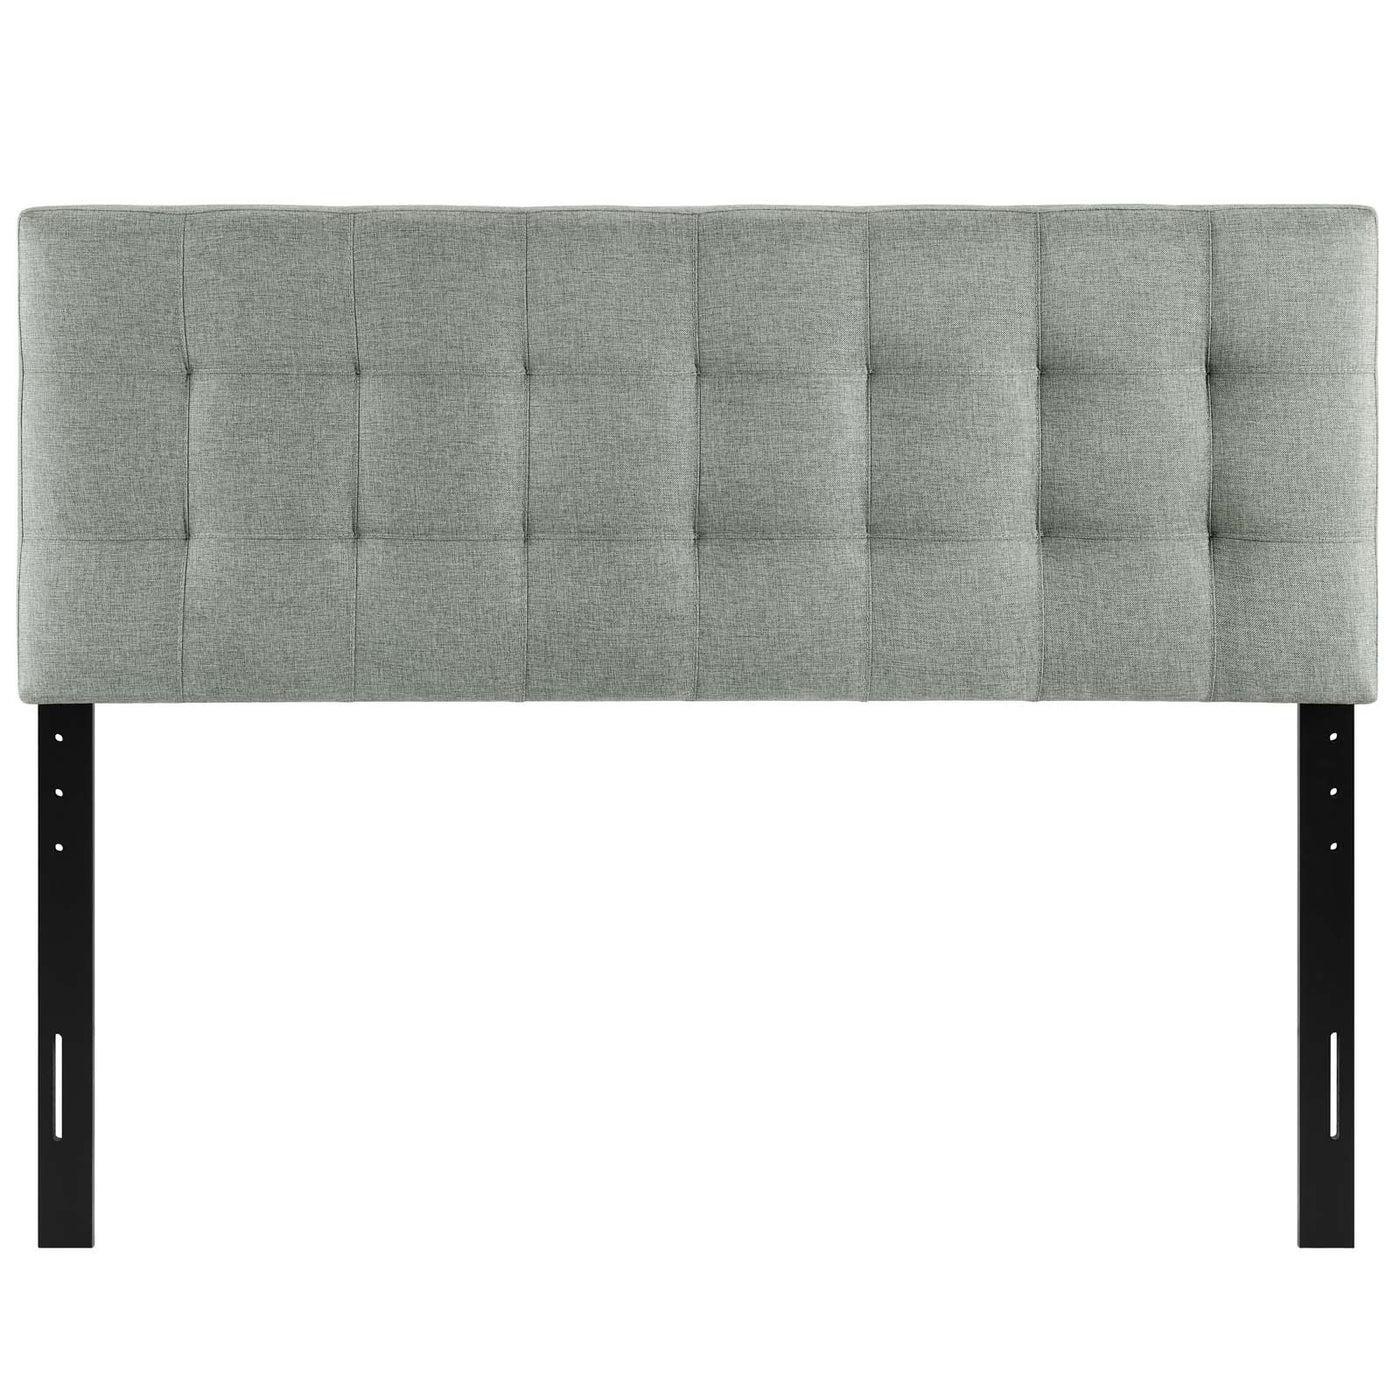 Lily King Upholstered Fabric Headboard